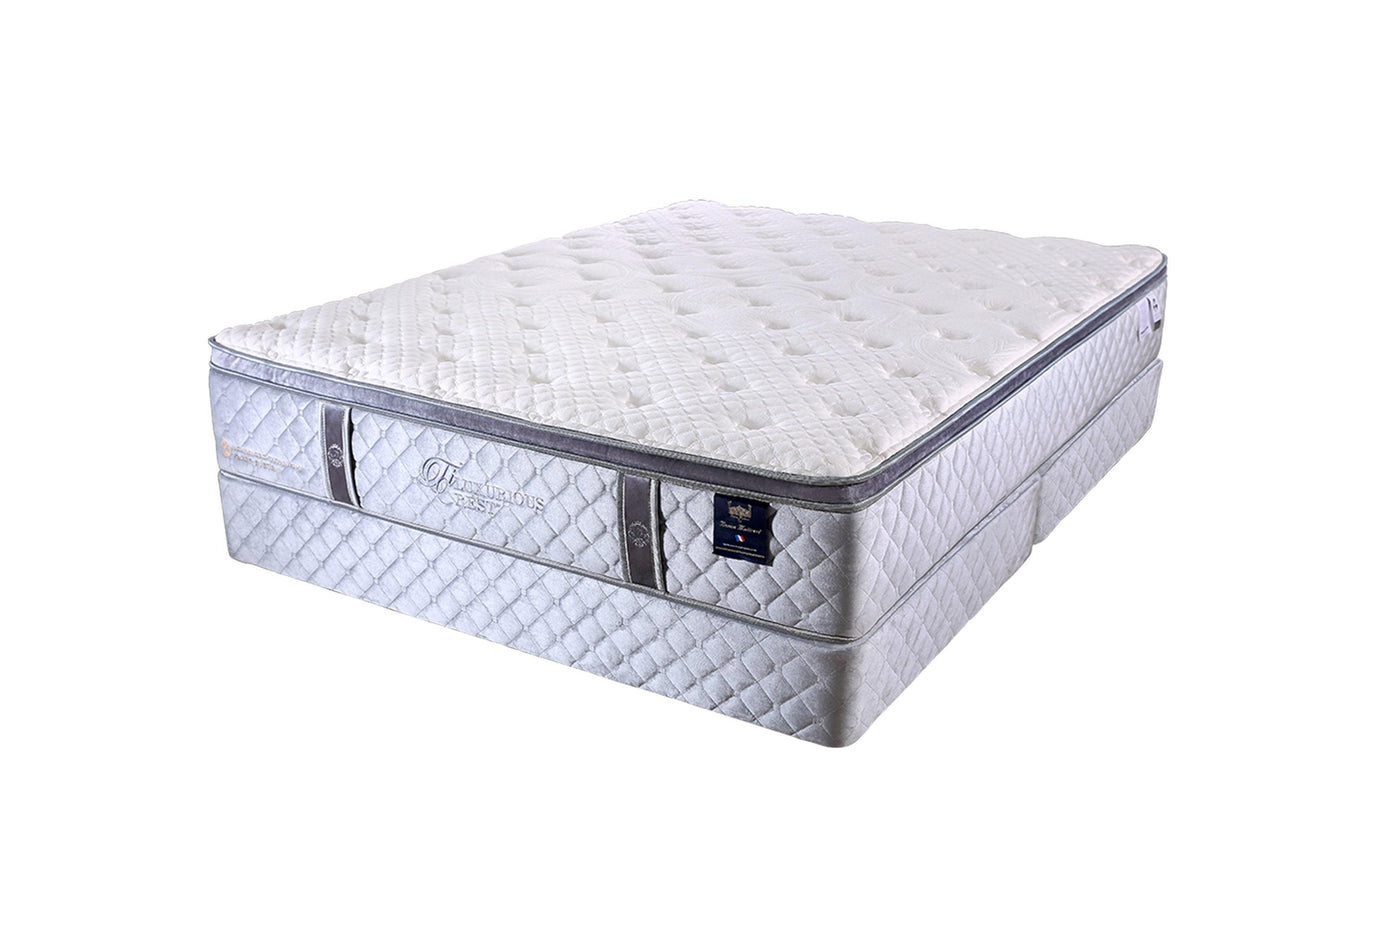 Le Moût Mattress -Titanium Lux Hoya Casa Hoyacasa.ca couch sofa bed 4 seater sectional table kitchen table love seat sofa bed matress Toronto Canada manufactures home decoration frames indoor Ottoman sale